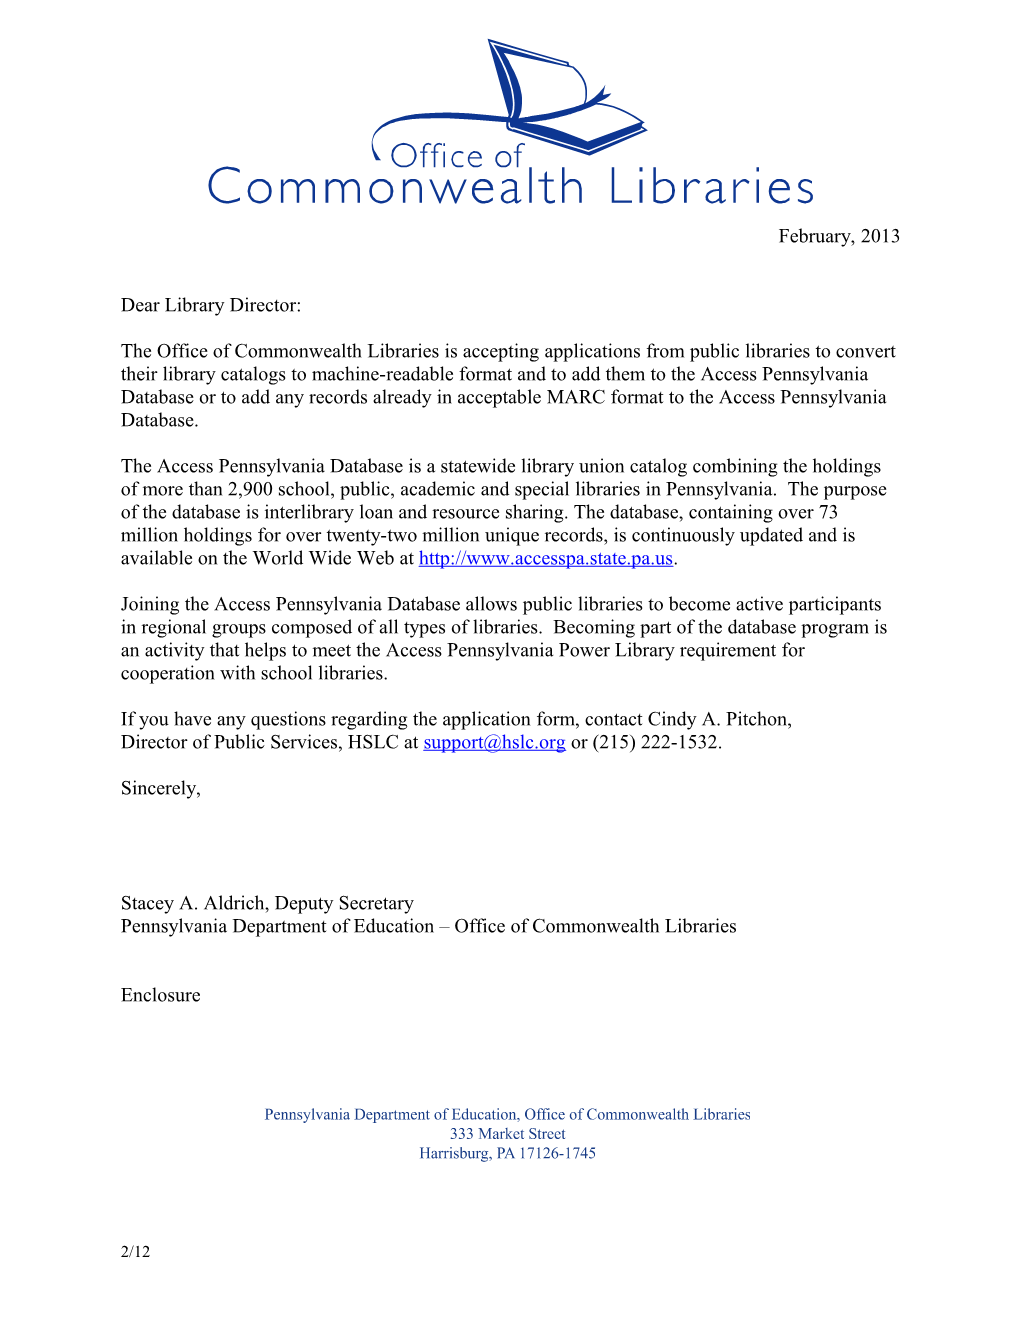 The Office of Commonwealth Libraries Is Accepting Applications from Public Libraries to Convert